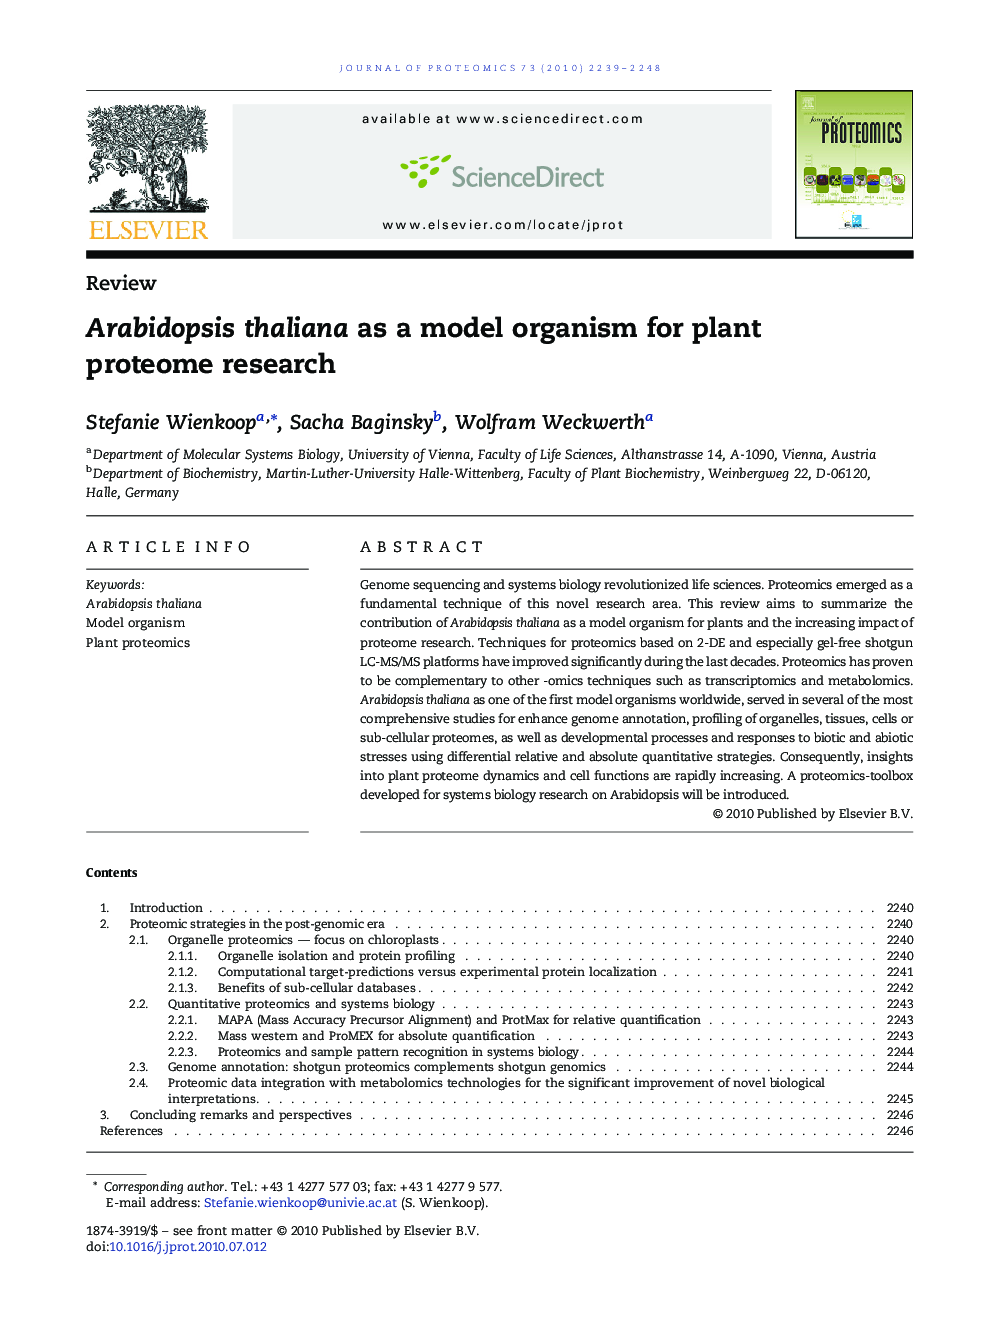 Arabidopsis thaliana as a model organism for plant proteome research